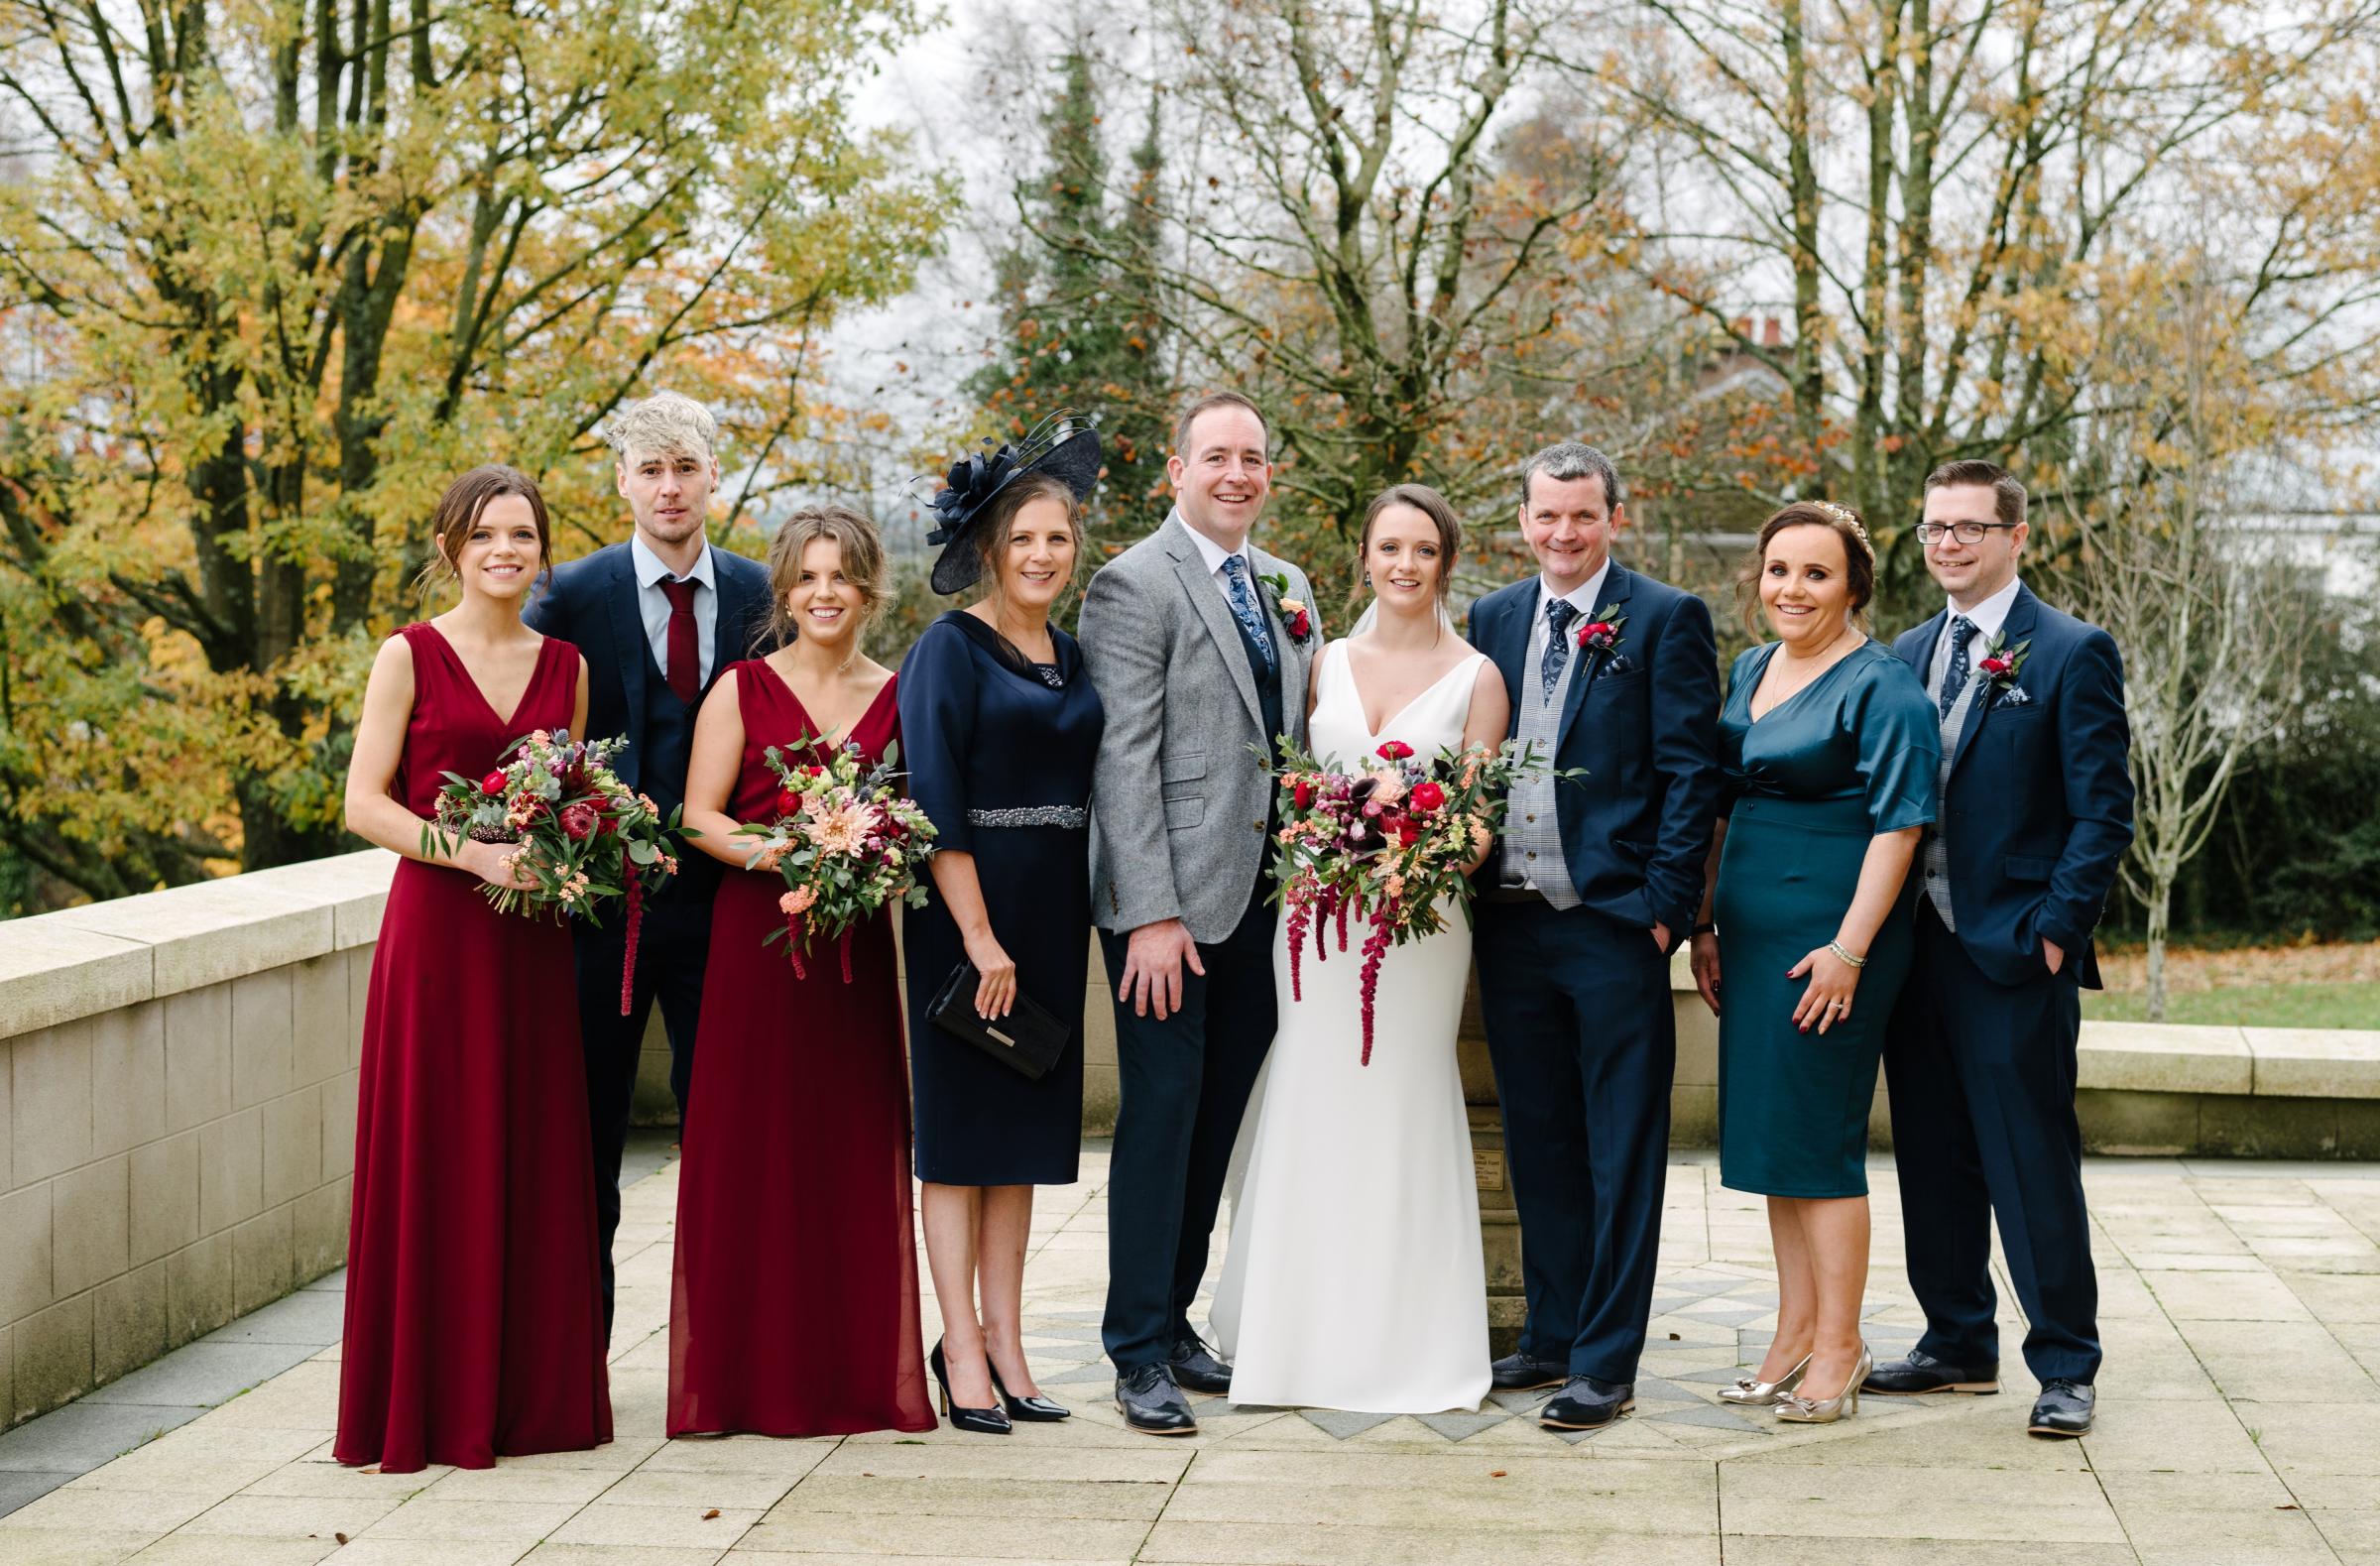 The bride and groom pictured with the brides family. From left to right: Maeve Gallagher, bridesmaid, Aaron Daly, Edel Gallagher, bridesmaid, Alice Gallagher, mother of the bride, Eóin Maguire, groom, Shauna Gallagher, bride, John Gallagher,